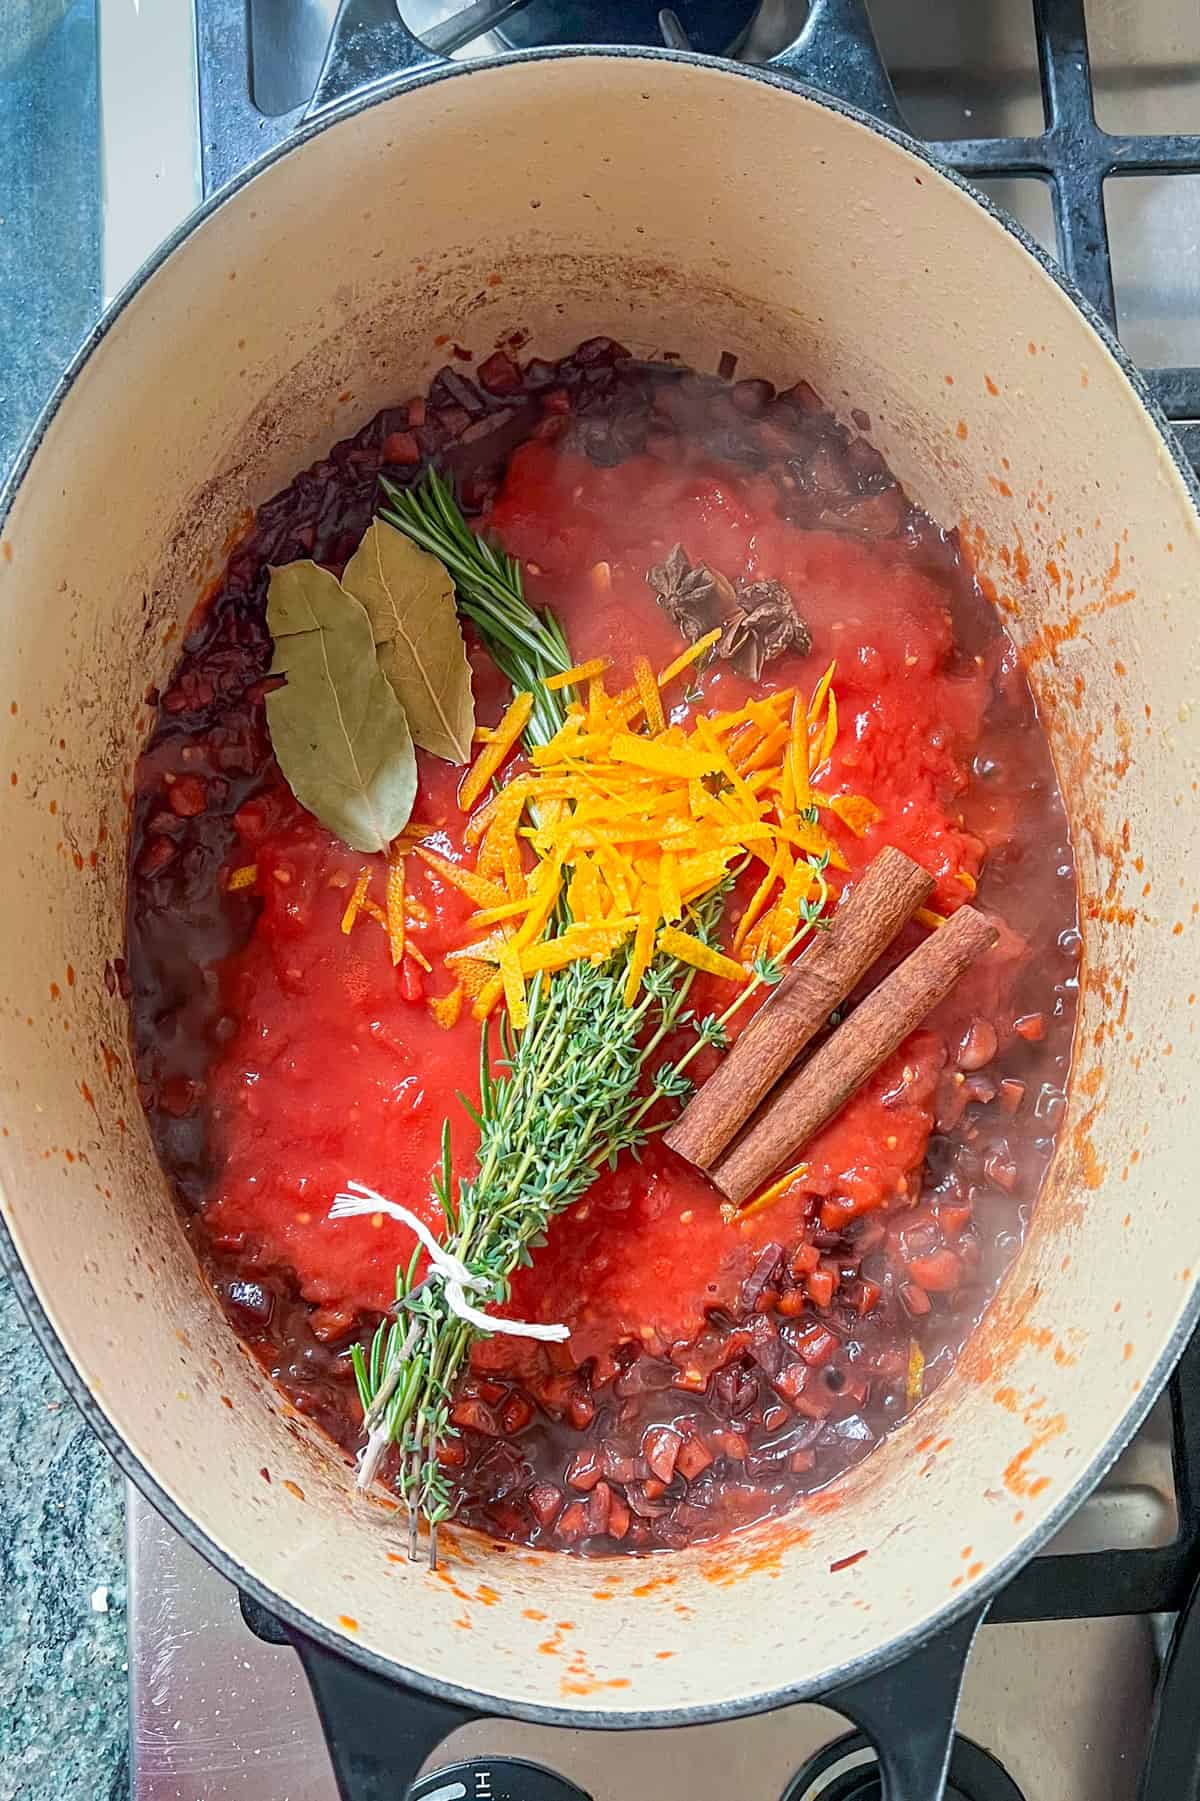 pureed tomatoes, herb bundle, cinnamon sticks, orange zest, bay heaves and star anise added to the stew pot.